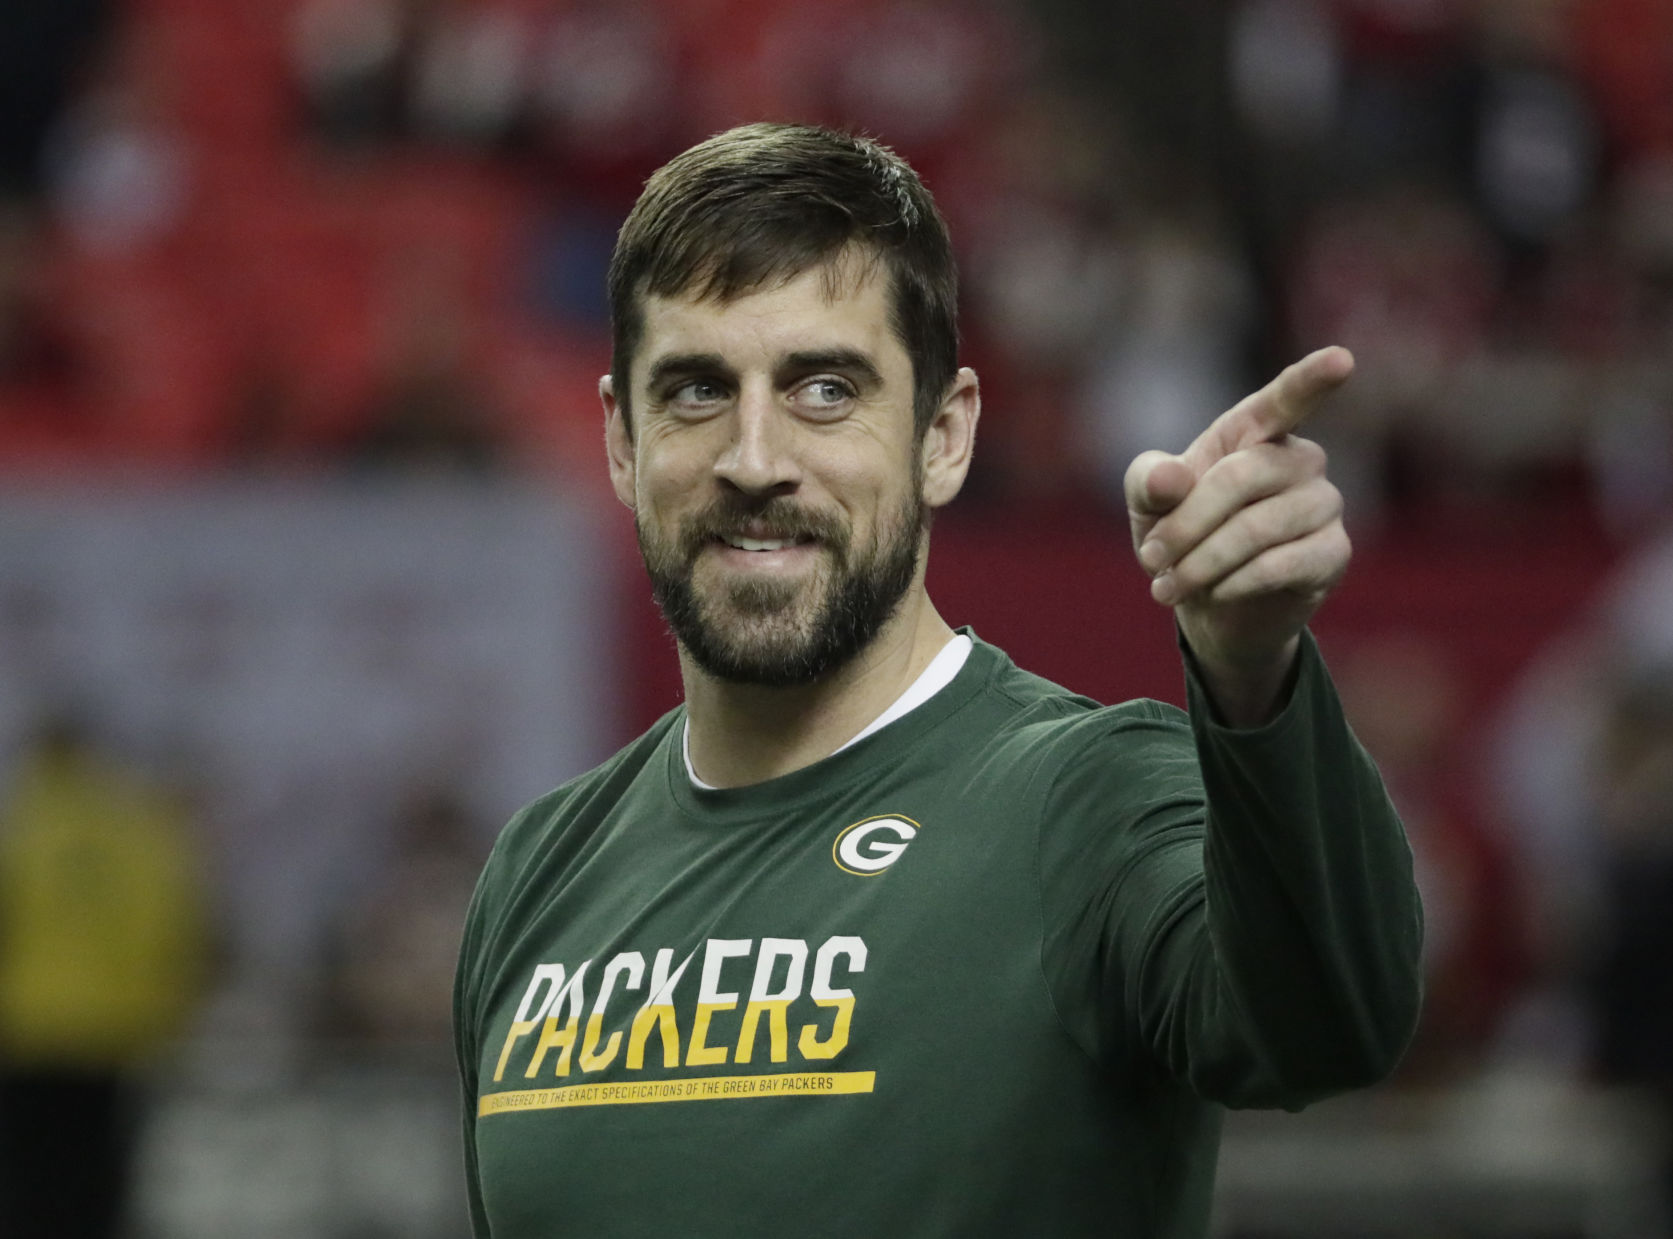 who has better stats in 2014 roma or aaron rodgers